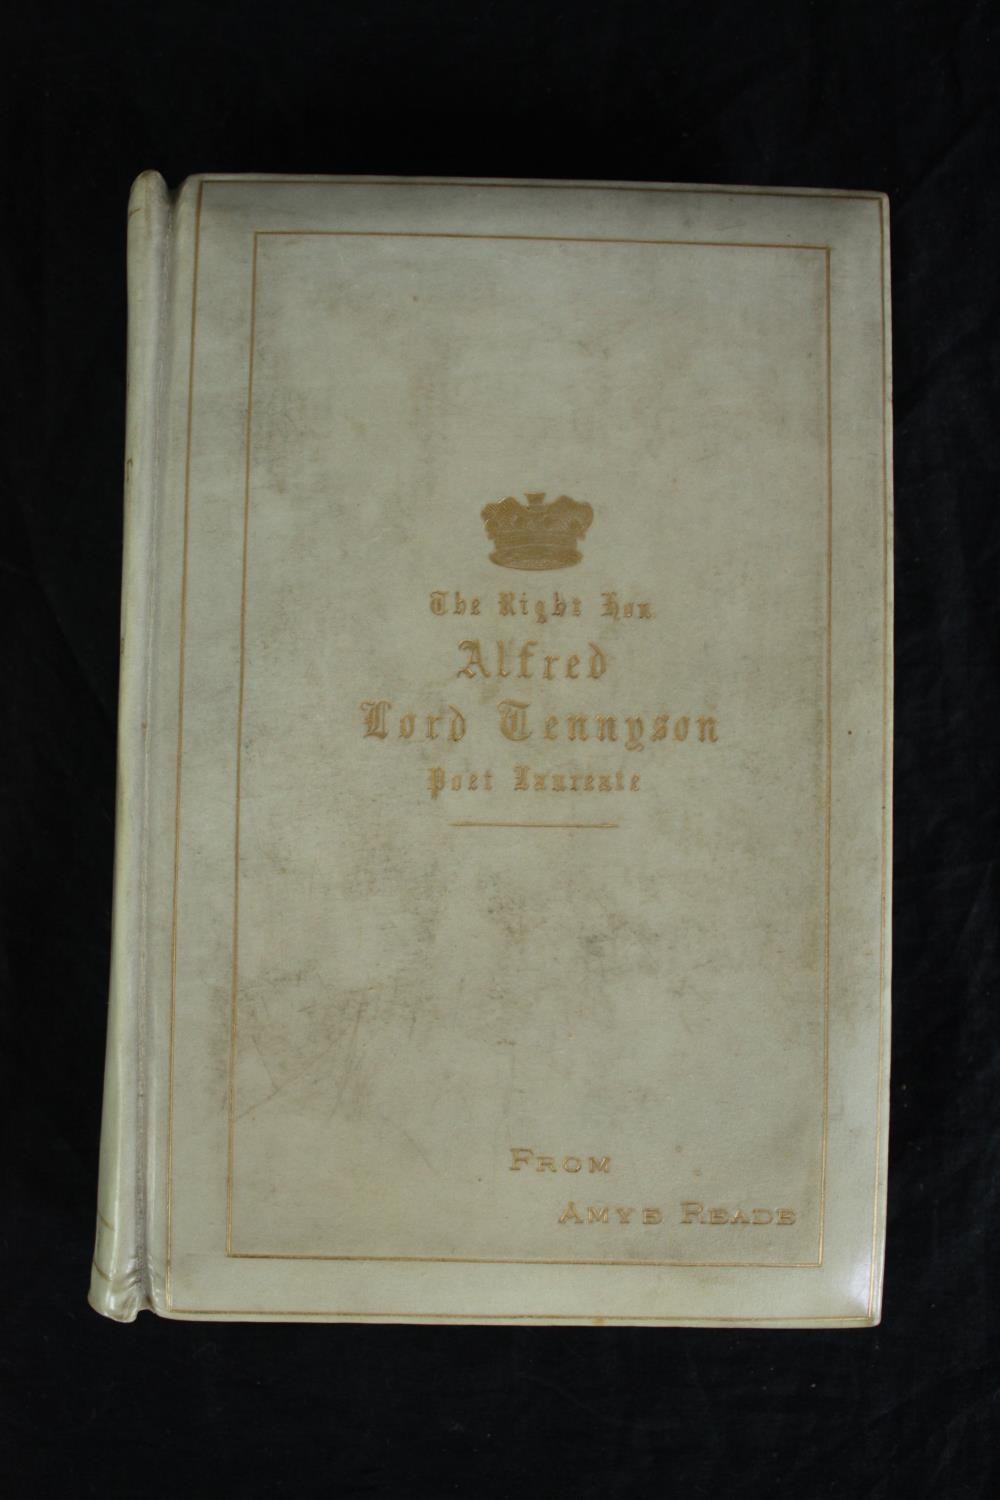 Full vellum binding presented to 'The Right Hon. Alfred Lord Tennyson Poet Laureate' by the author